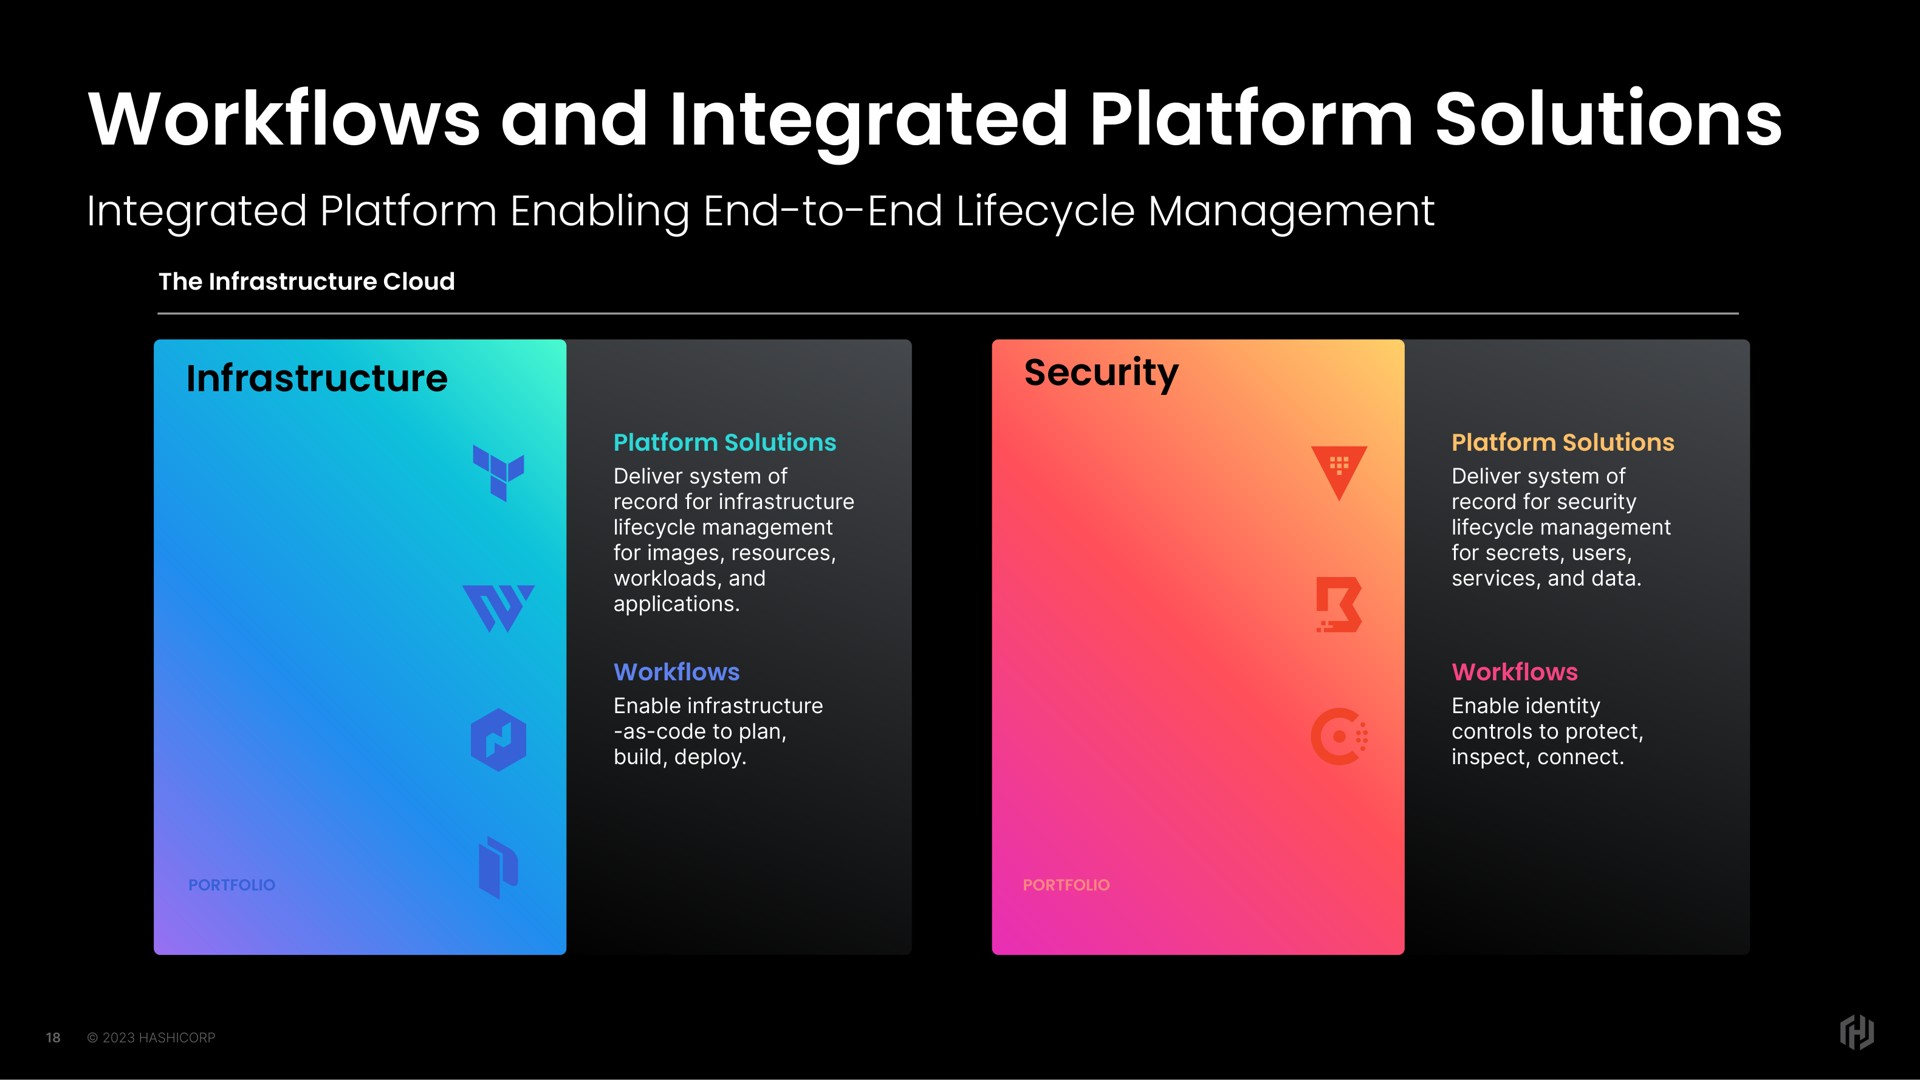 and integrated platform solutions | HashiCorp